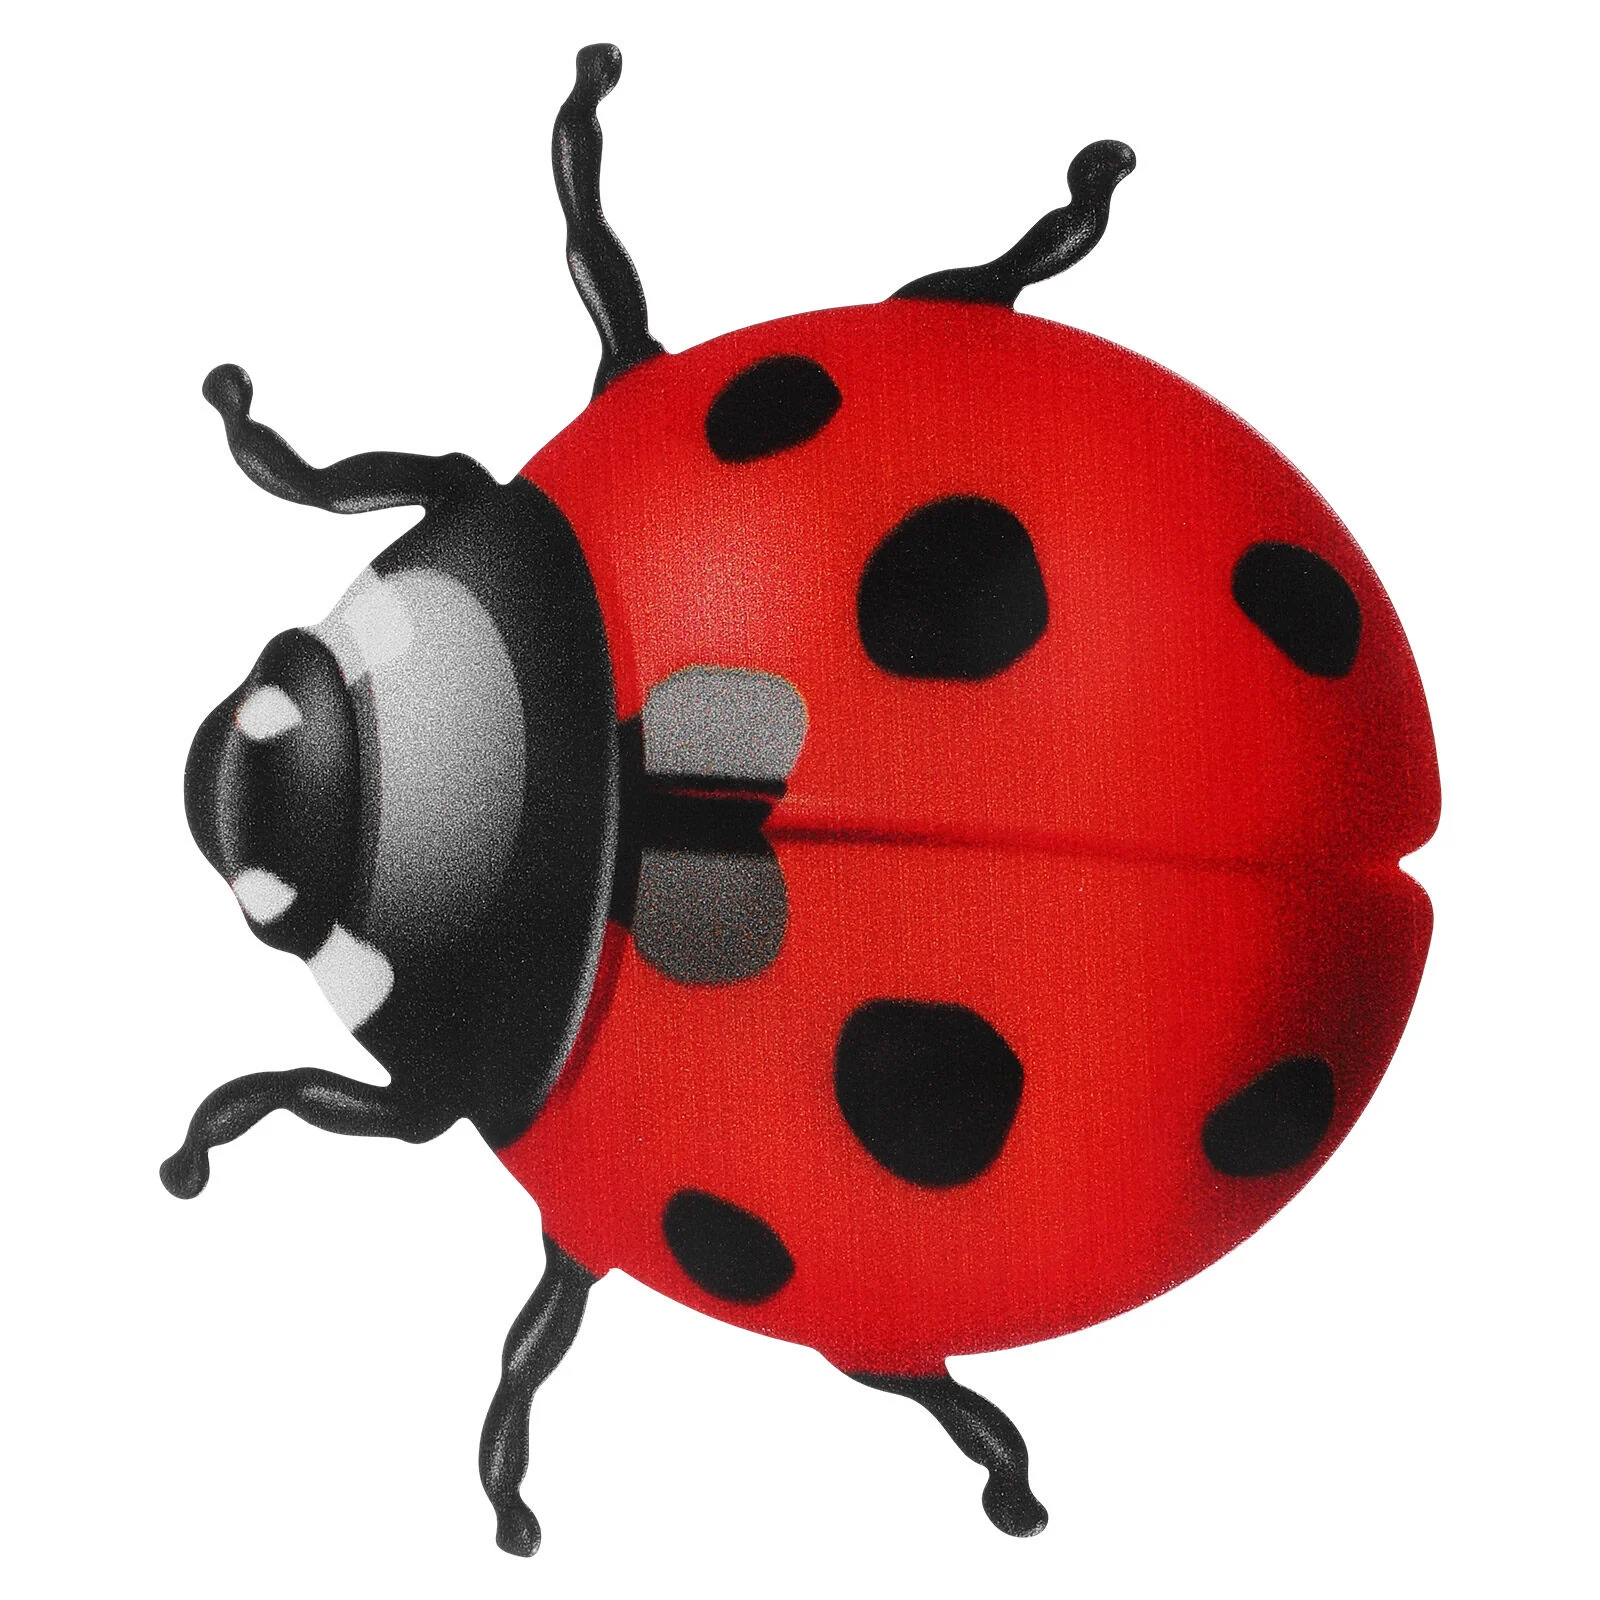 

Home Accents Decor Iron Beetle Outdoor Yard Wall Ornament Metal Ladybugs Hangings Sculpture 12X10CM Garden Decorations Red